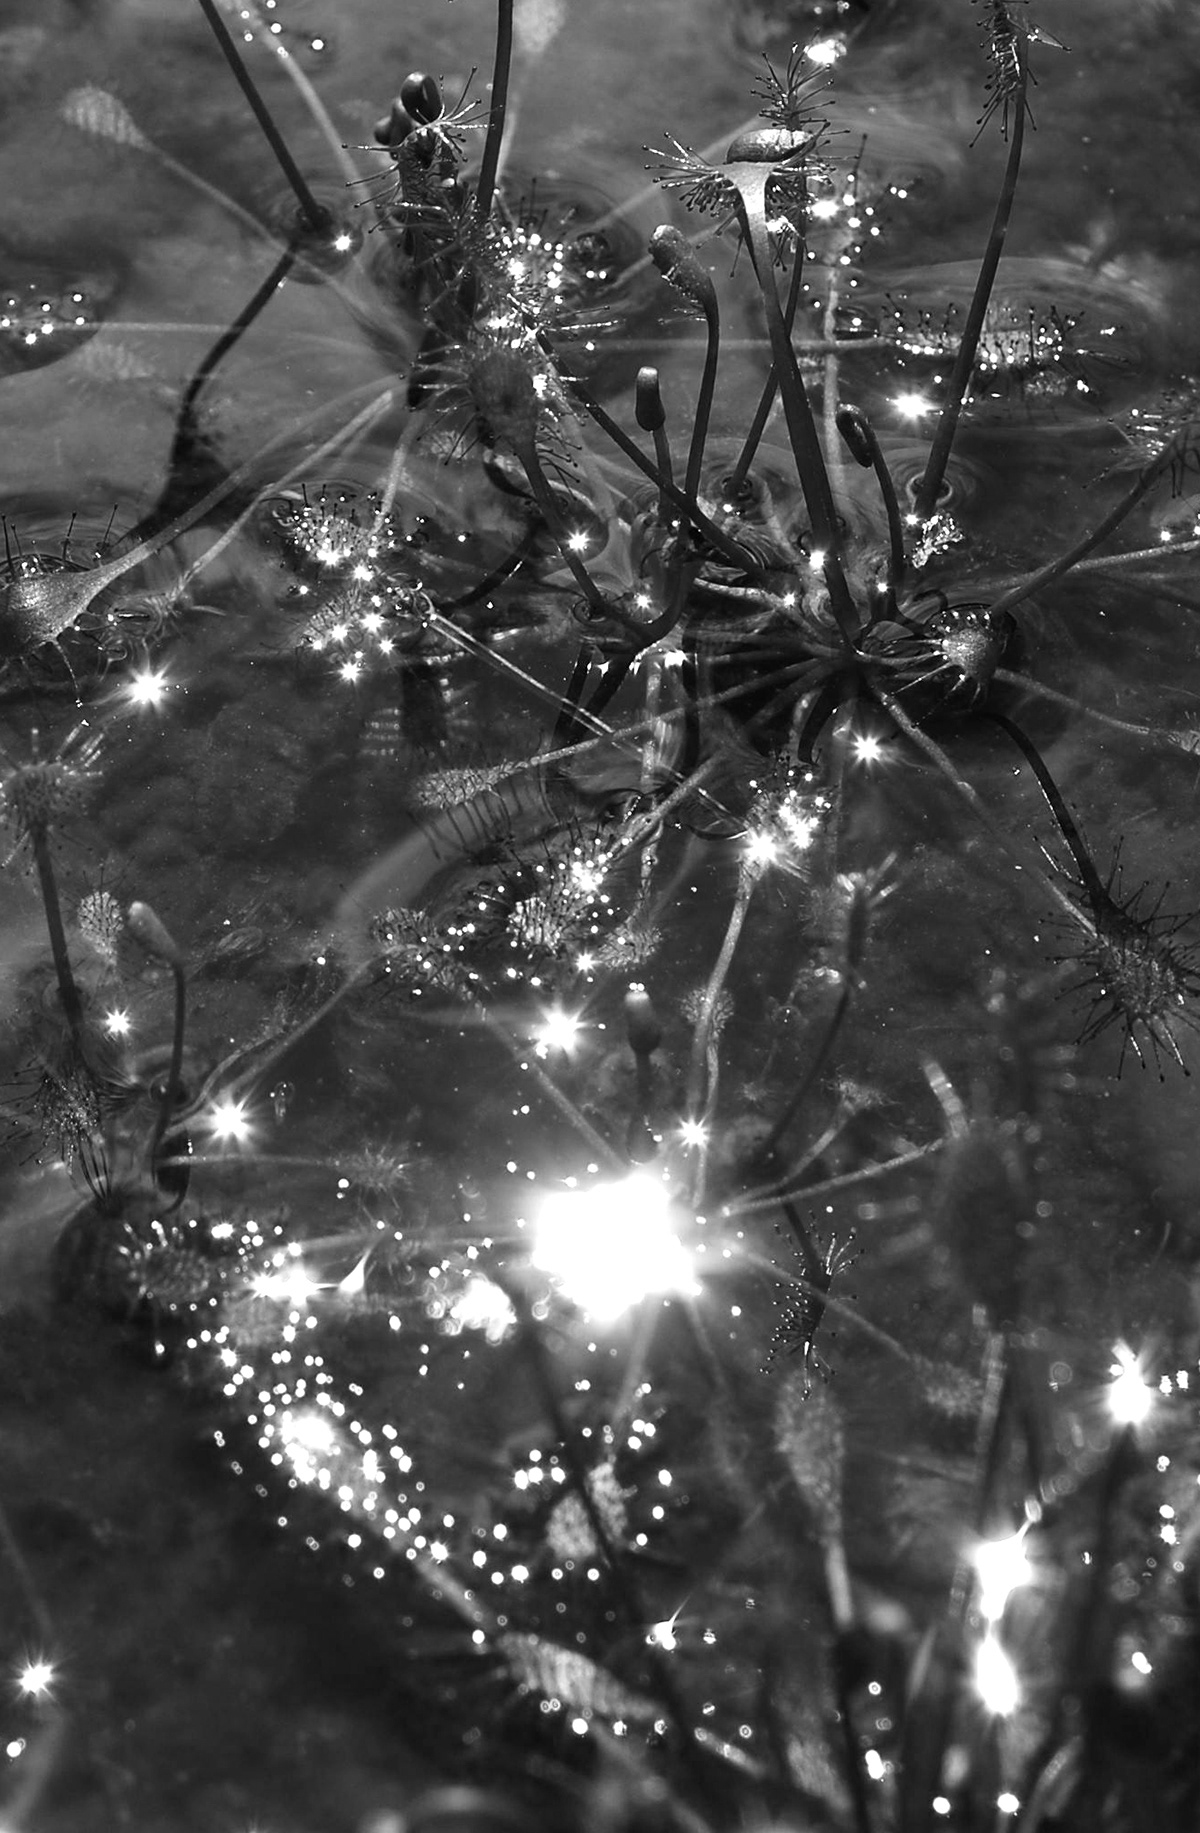 light swamps Nature water Sun plants insectifore science fiction